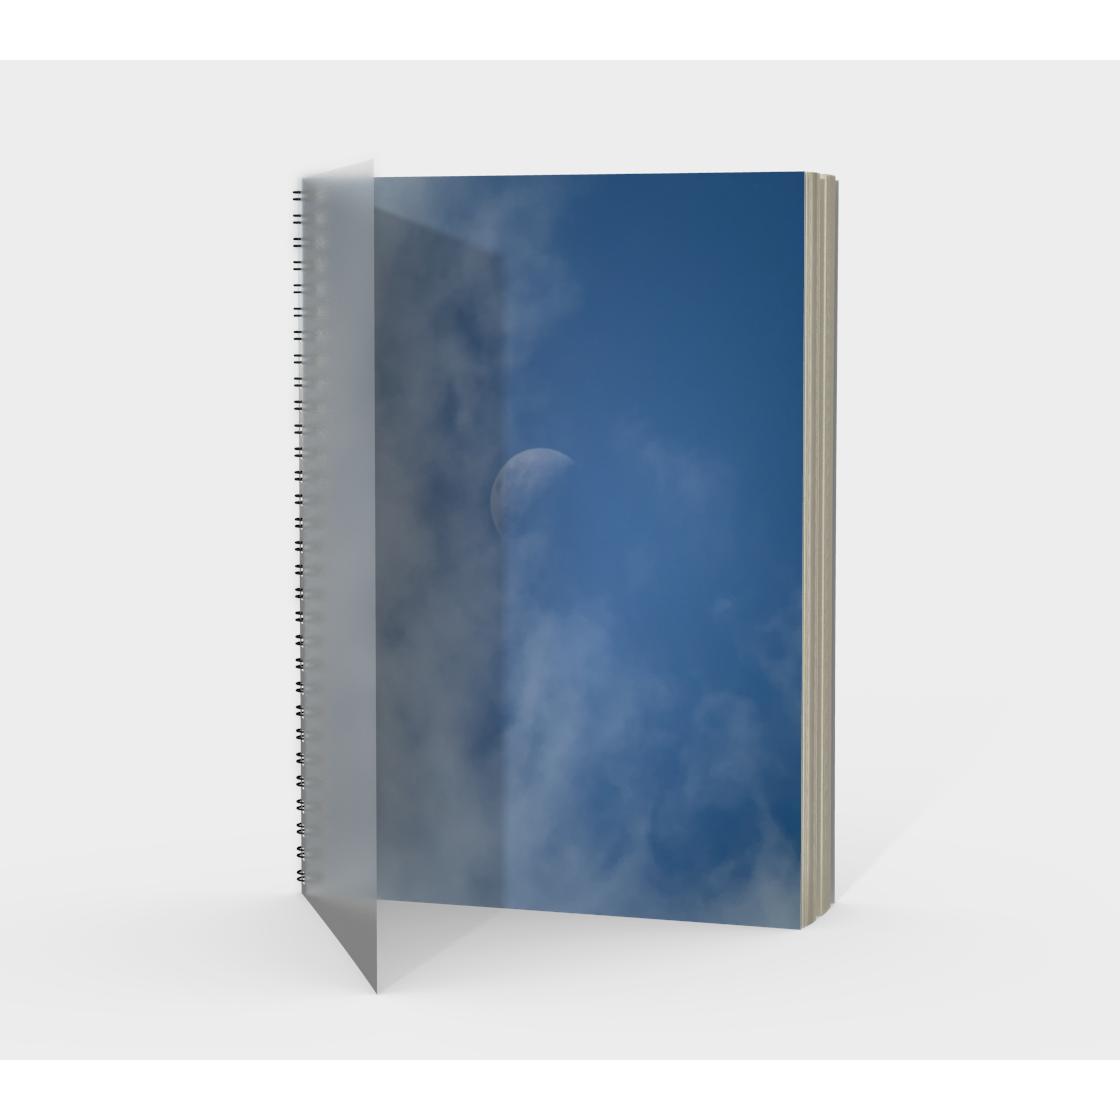 Notebook, Spiral-Bound, Custom Designed with our Half Moon Picture, Front